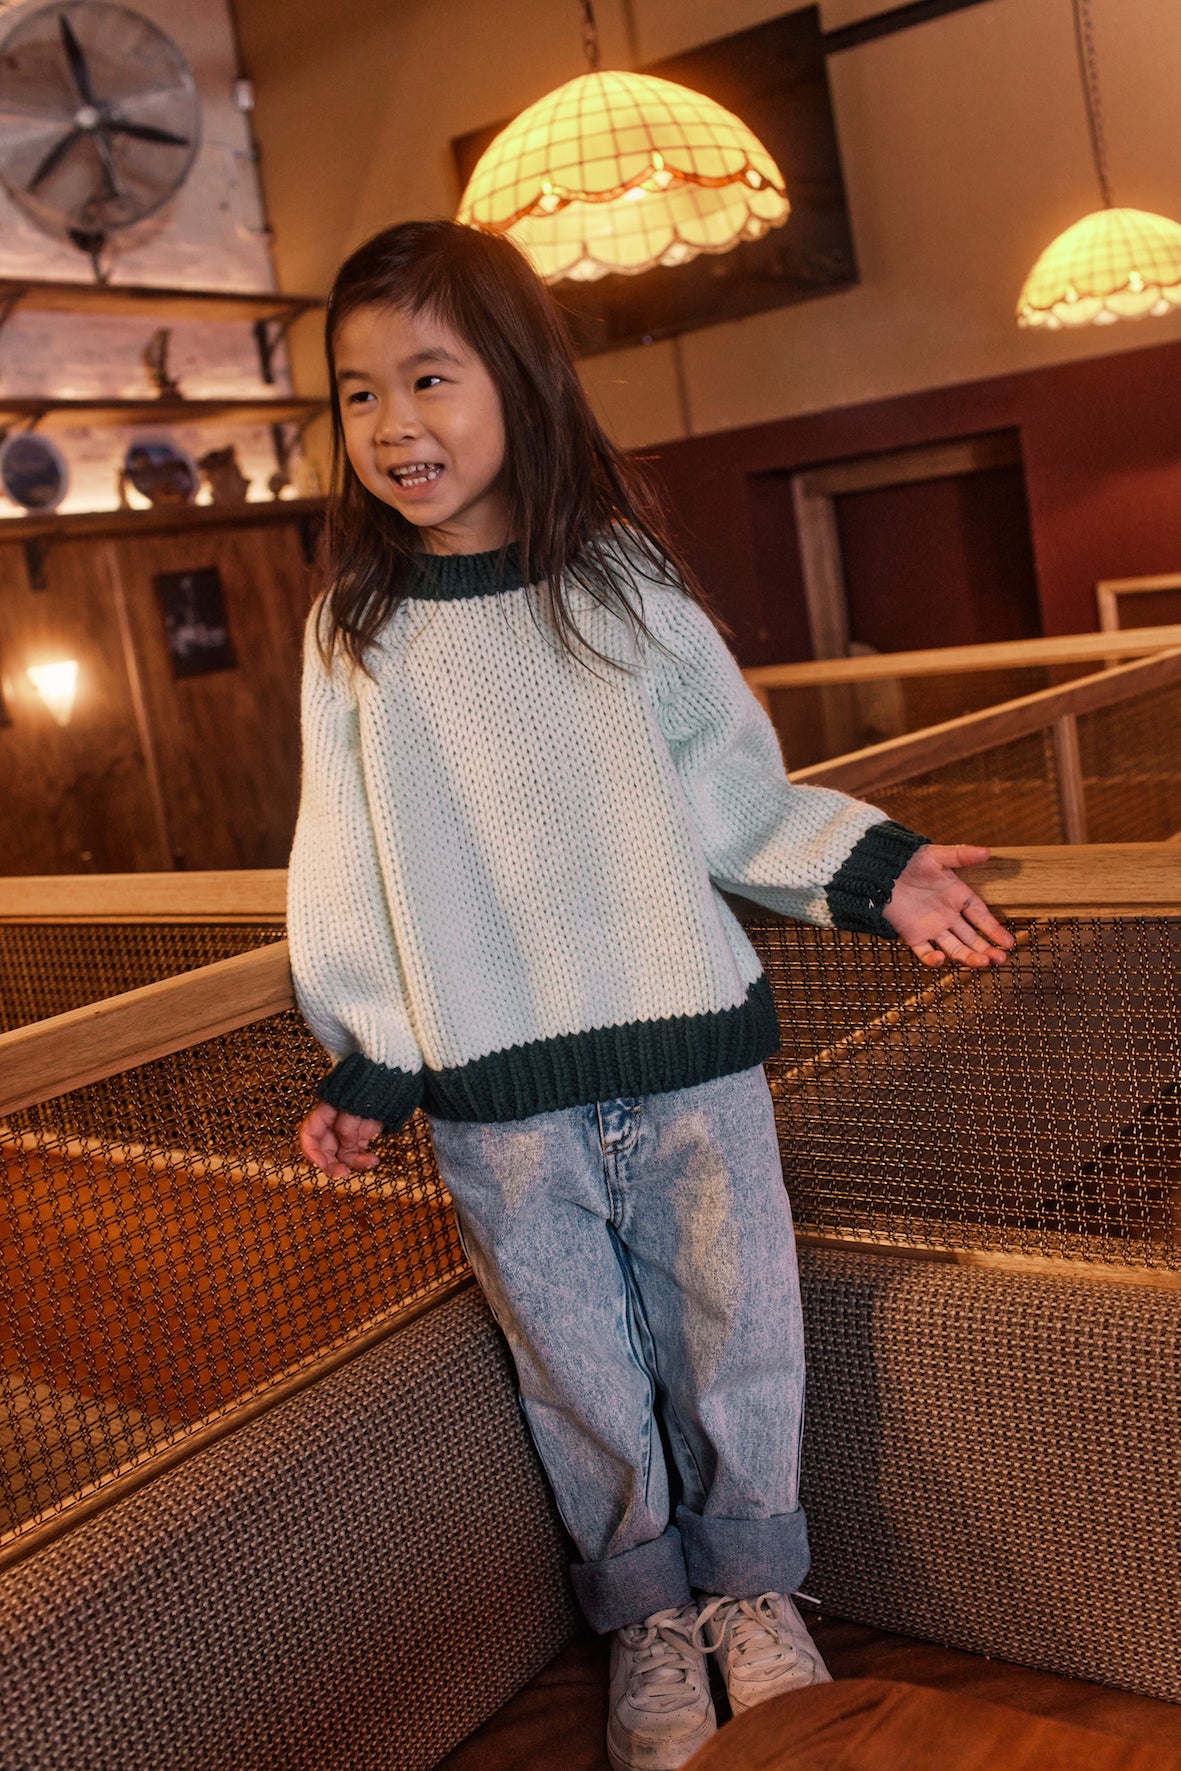 Goldie + Ace - Marley Knit Sweater (Green Ivy)